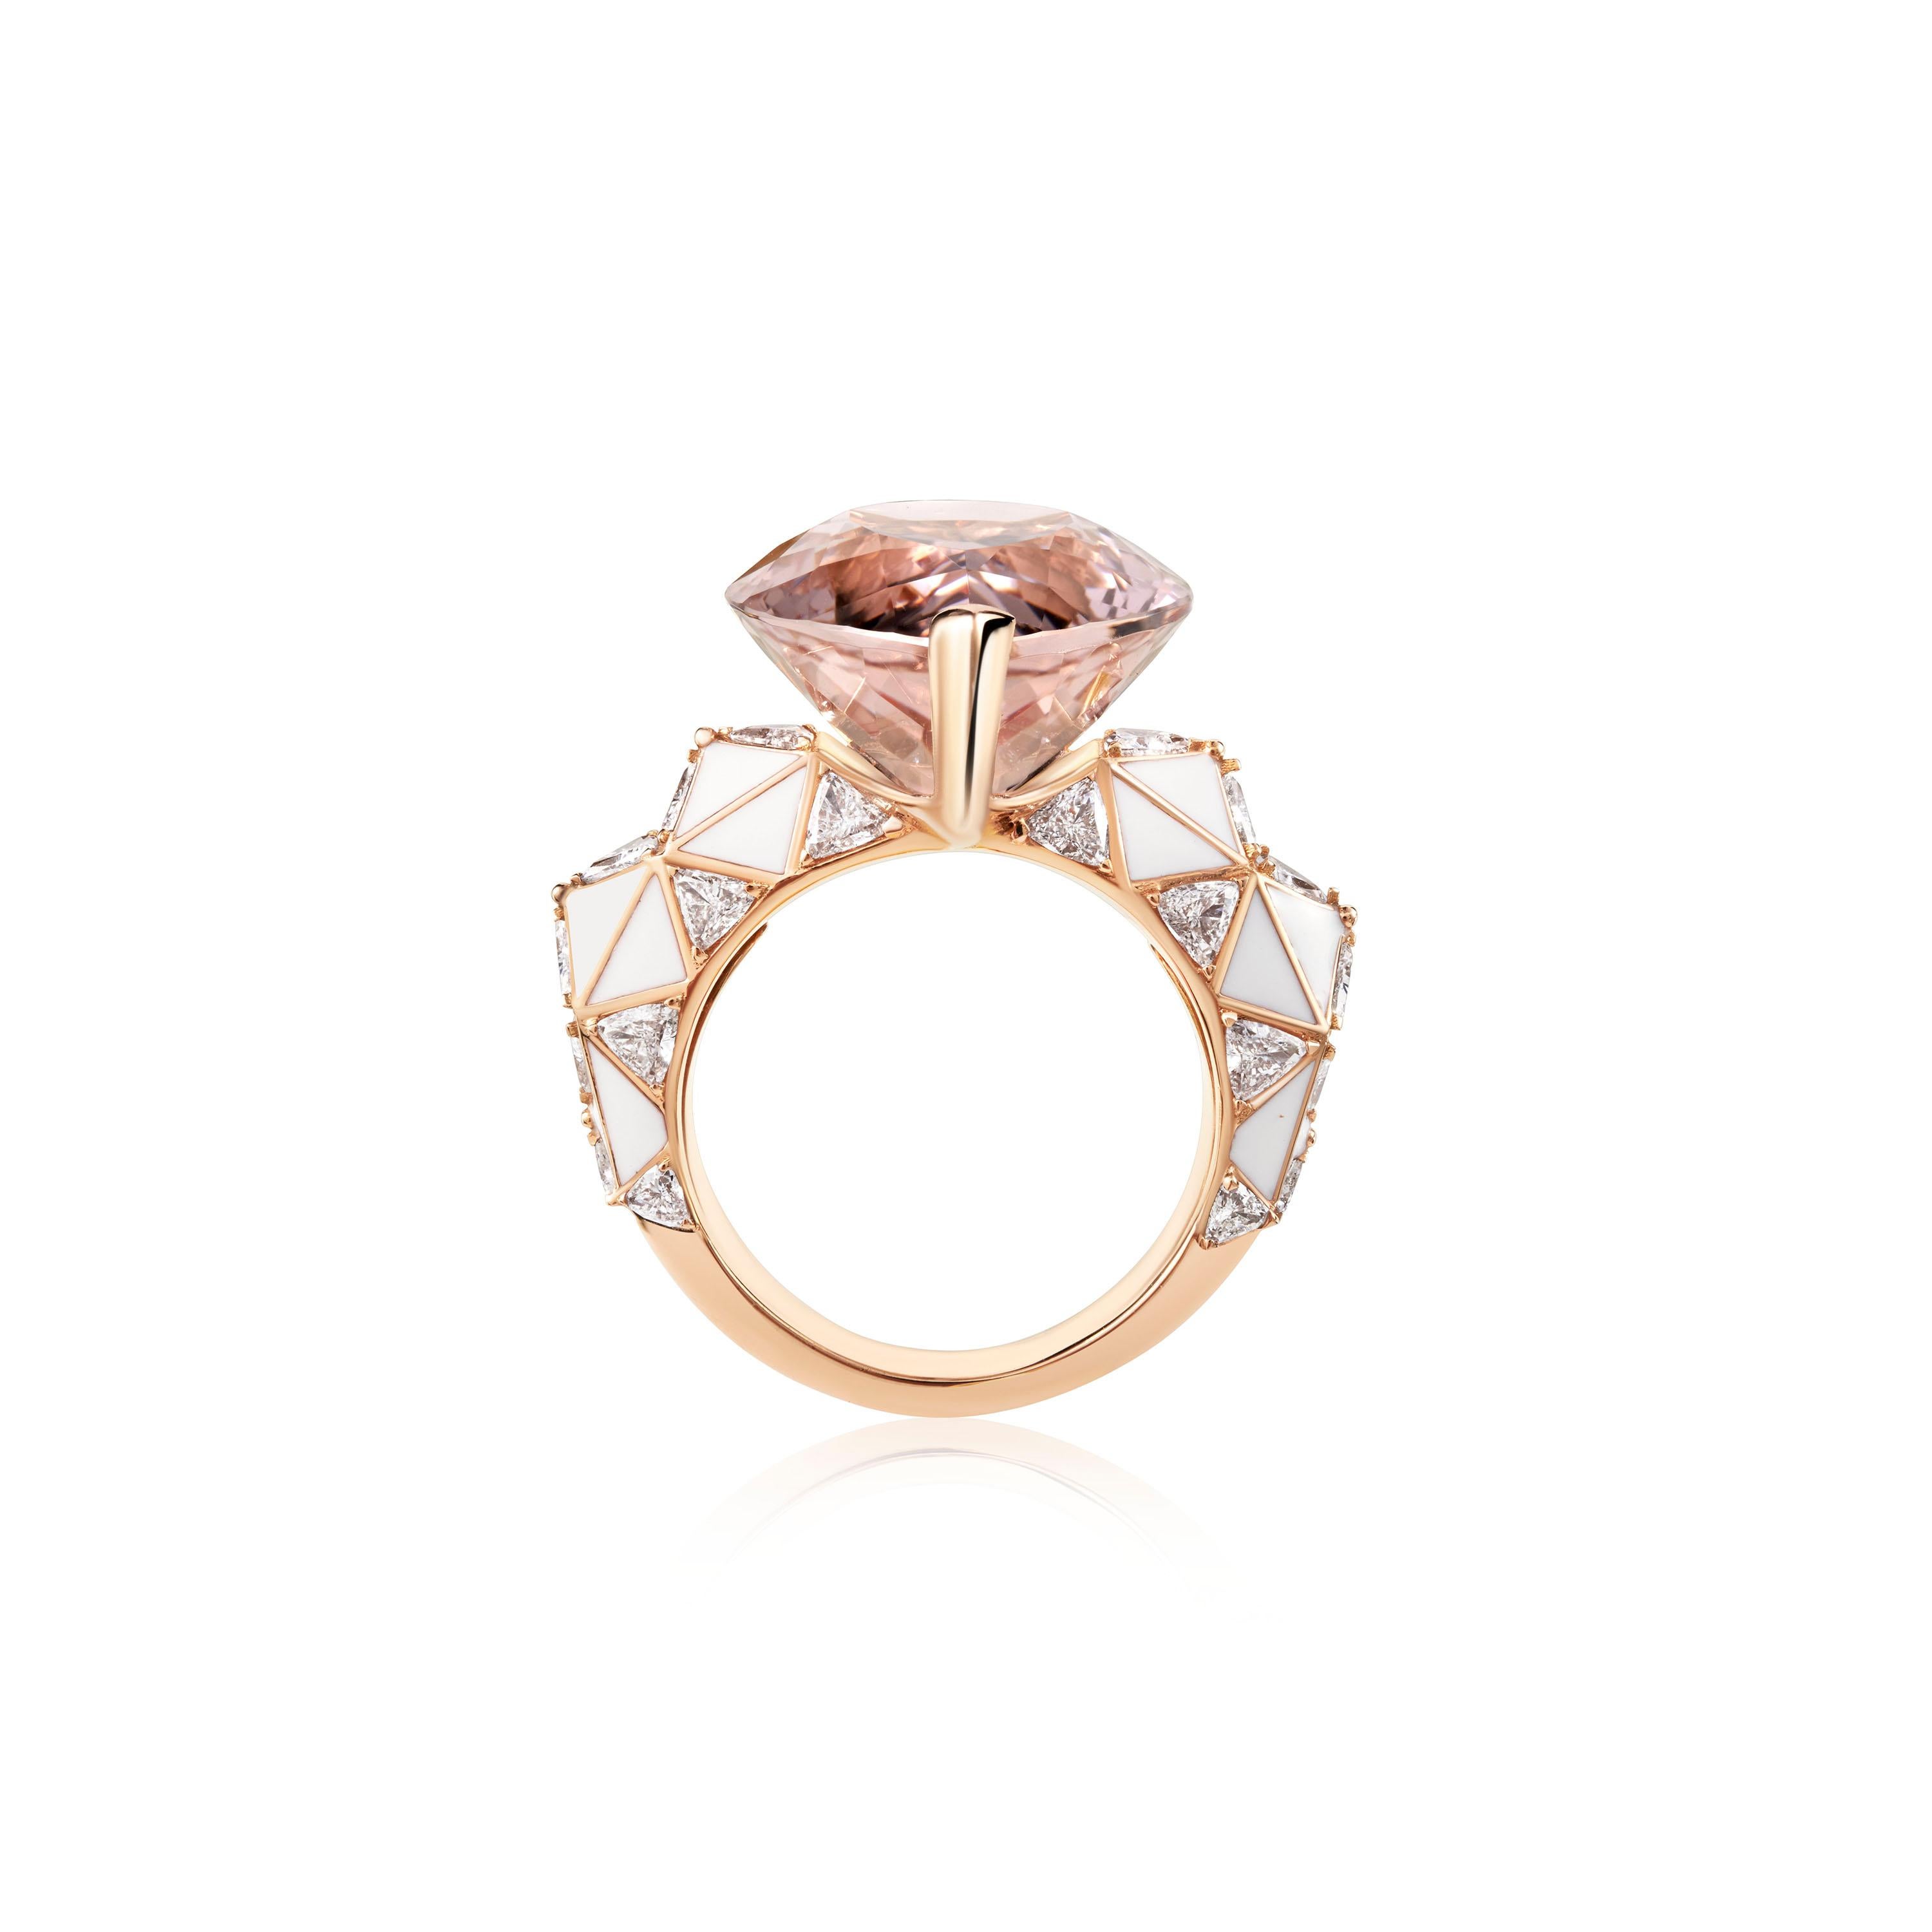 A Pear-Cut Morganite, Diamond and Enamel Gold Ring in the Candy Collection by Jewelry Designer, Sarah Ho.

The central Morganite in Sarah's favourite stone cut sits proudly between a tessellating pattern of trillion diamonds and enamel within the